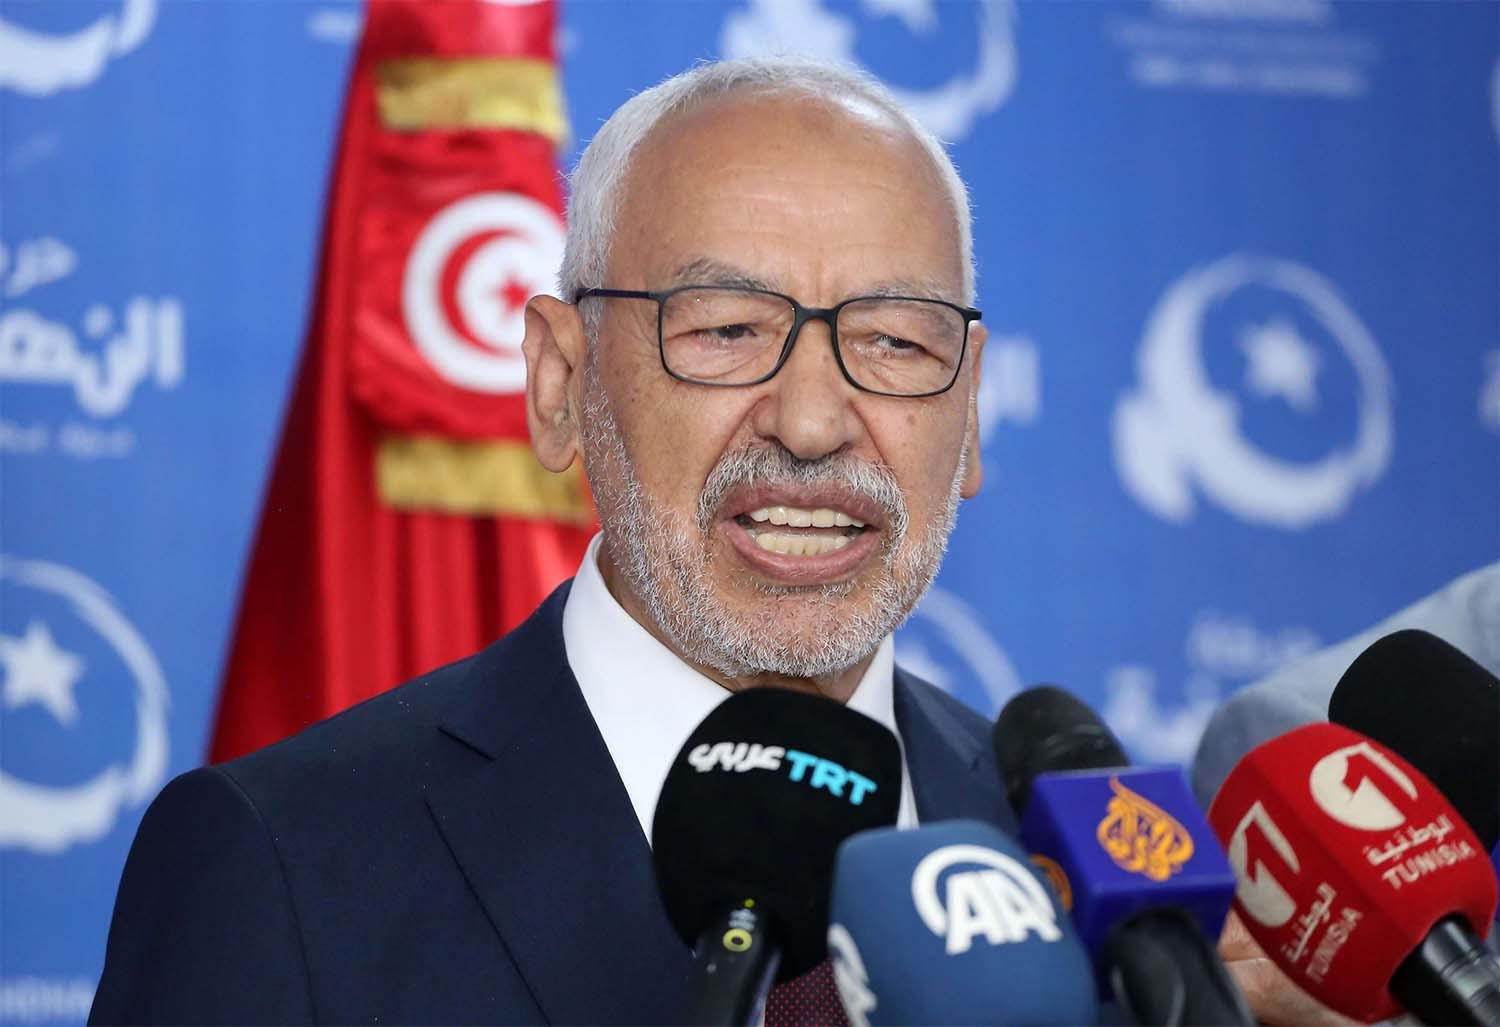 Tunisia opposition chief hit by anti-terror probe ahead of key vote